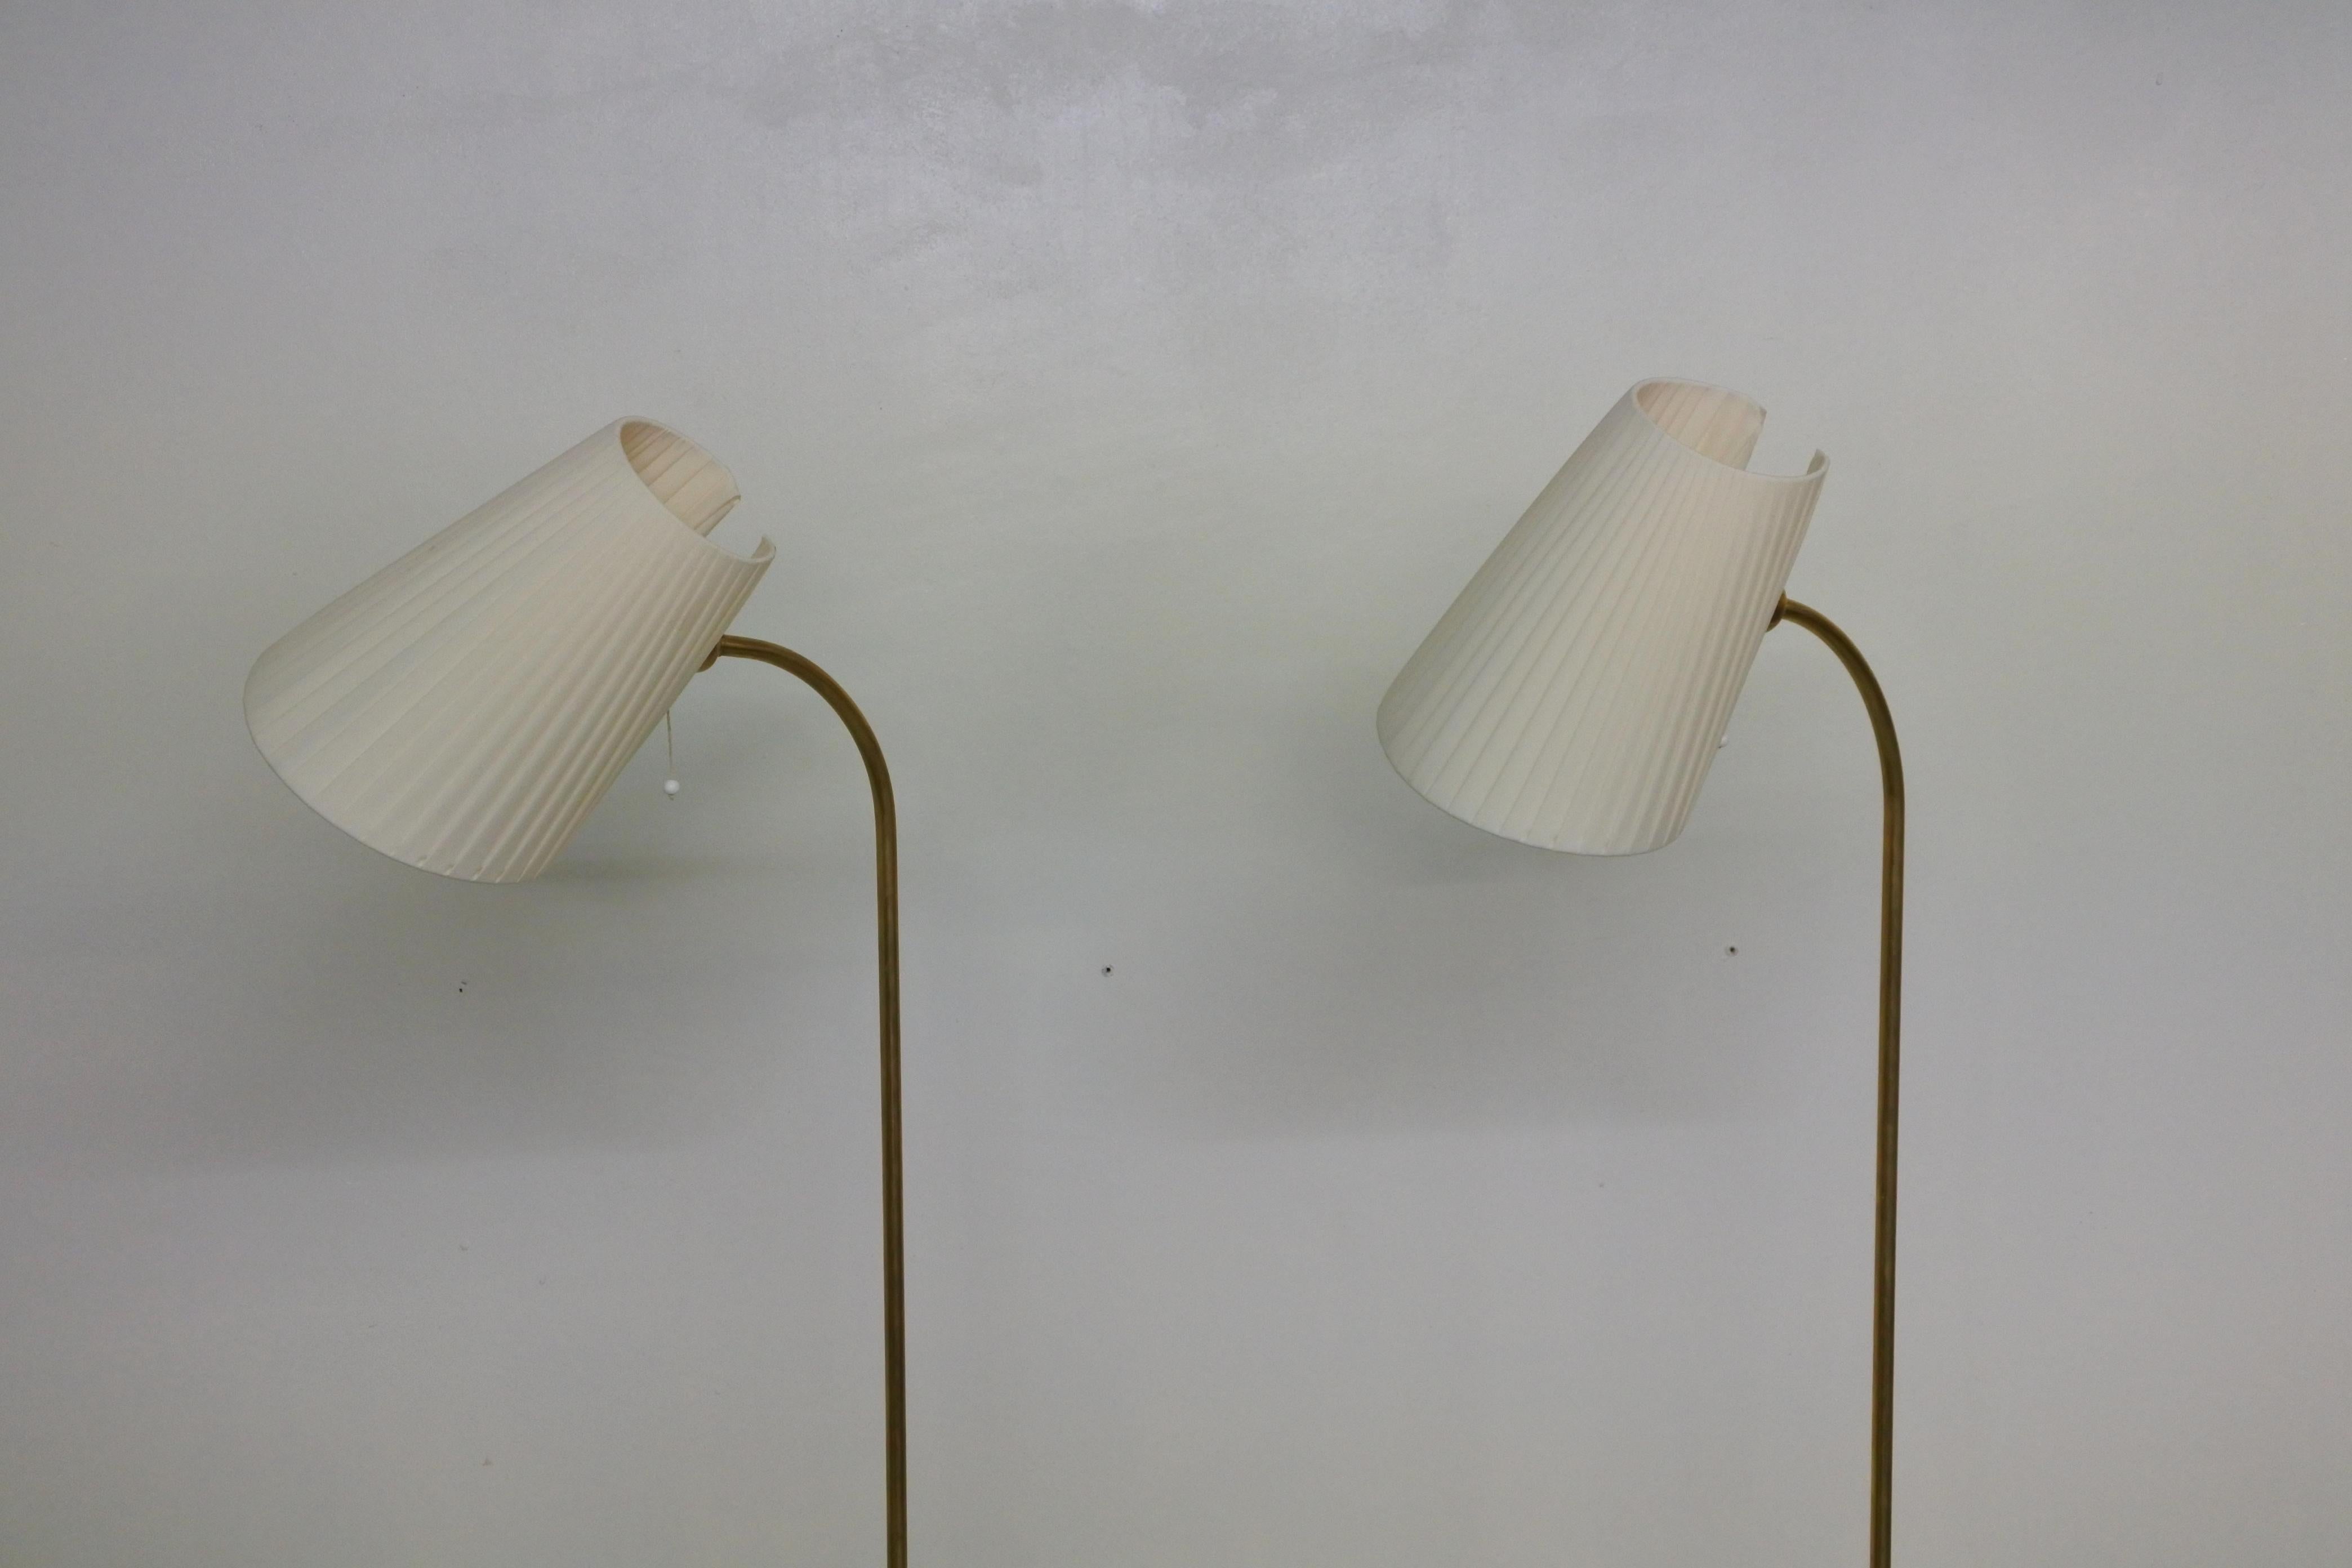 Tripod Floor Lamps in Brass by Lisa Johansson-Pape & Orno, Finland 1950s For Sale 2